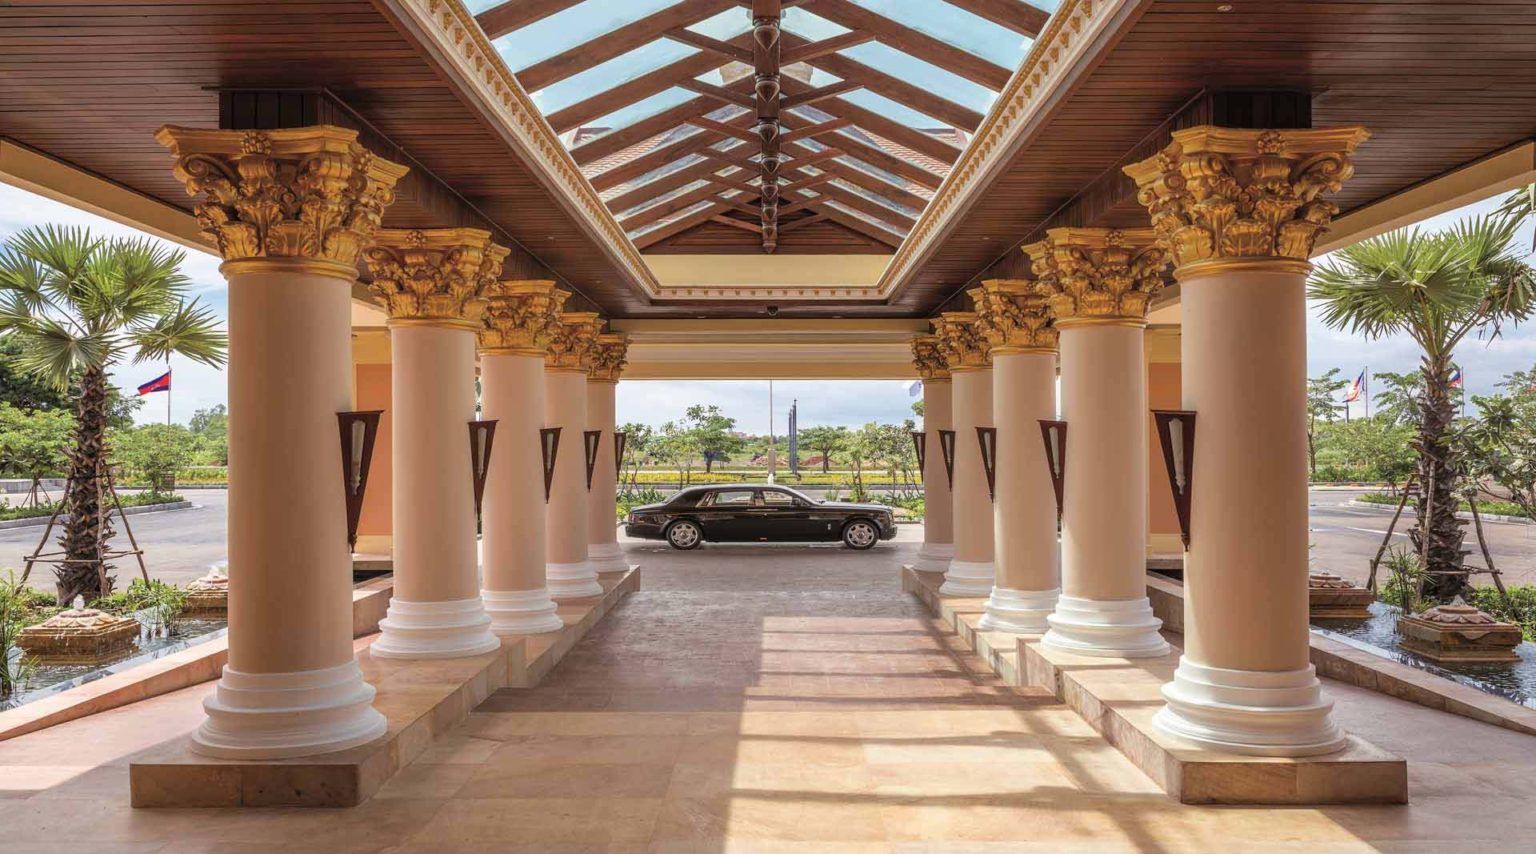 Luxury car under the overhang outside the Sokha Siem Reap Resort main entrance